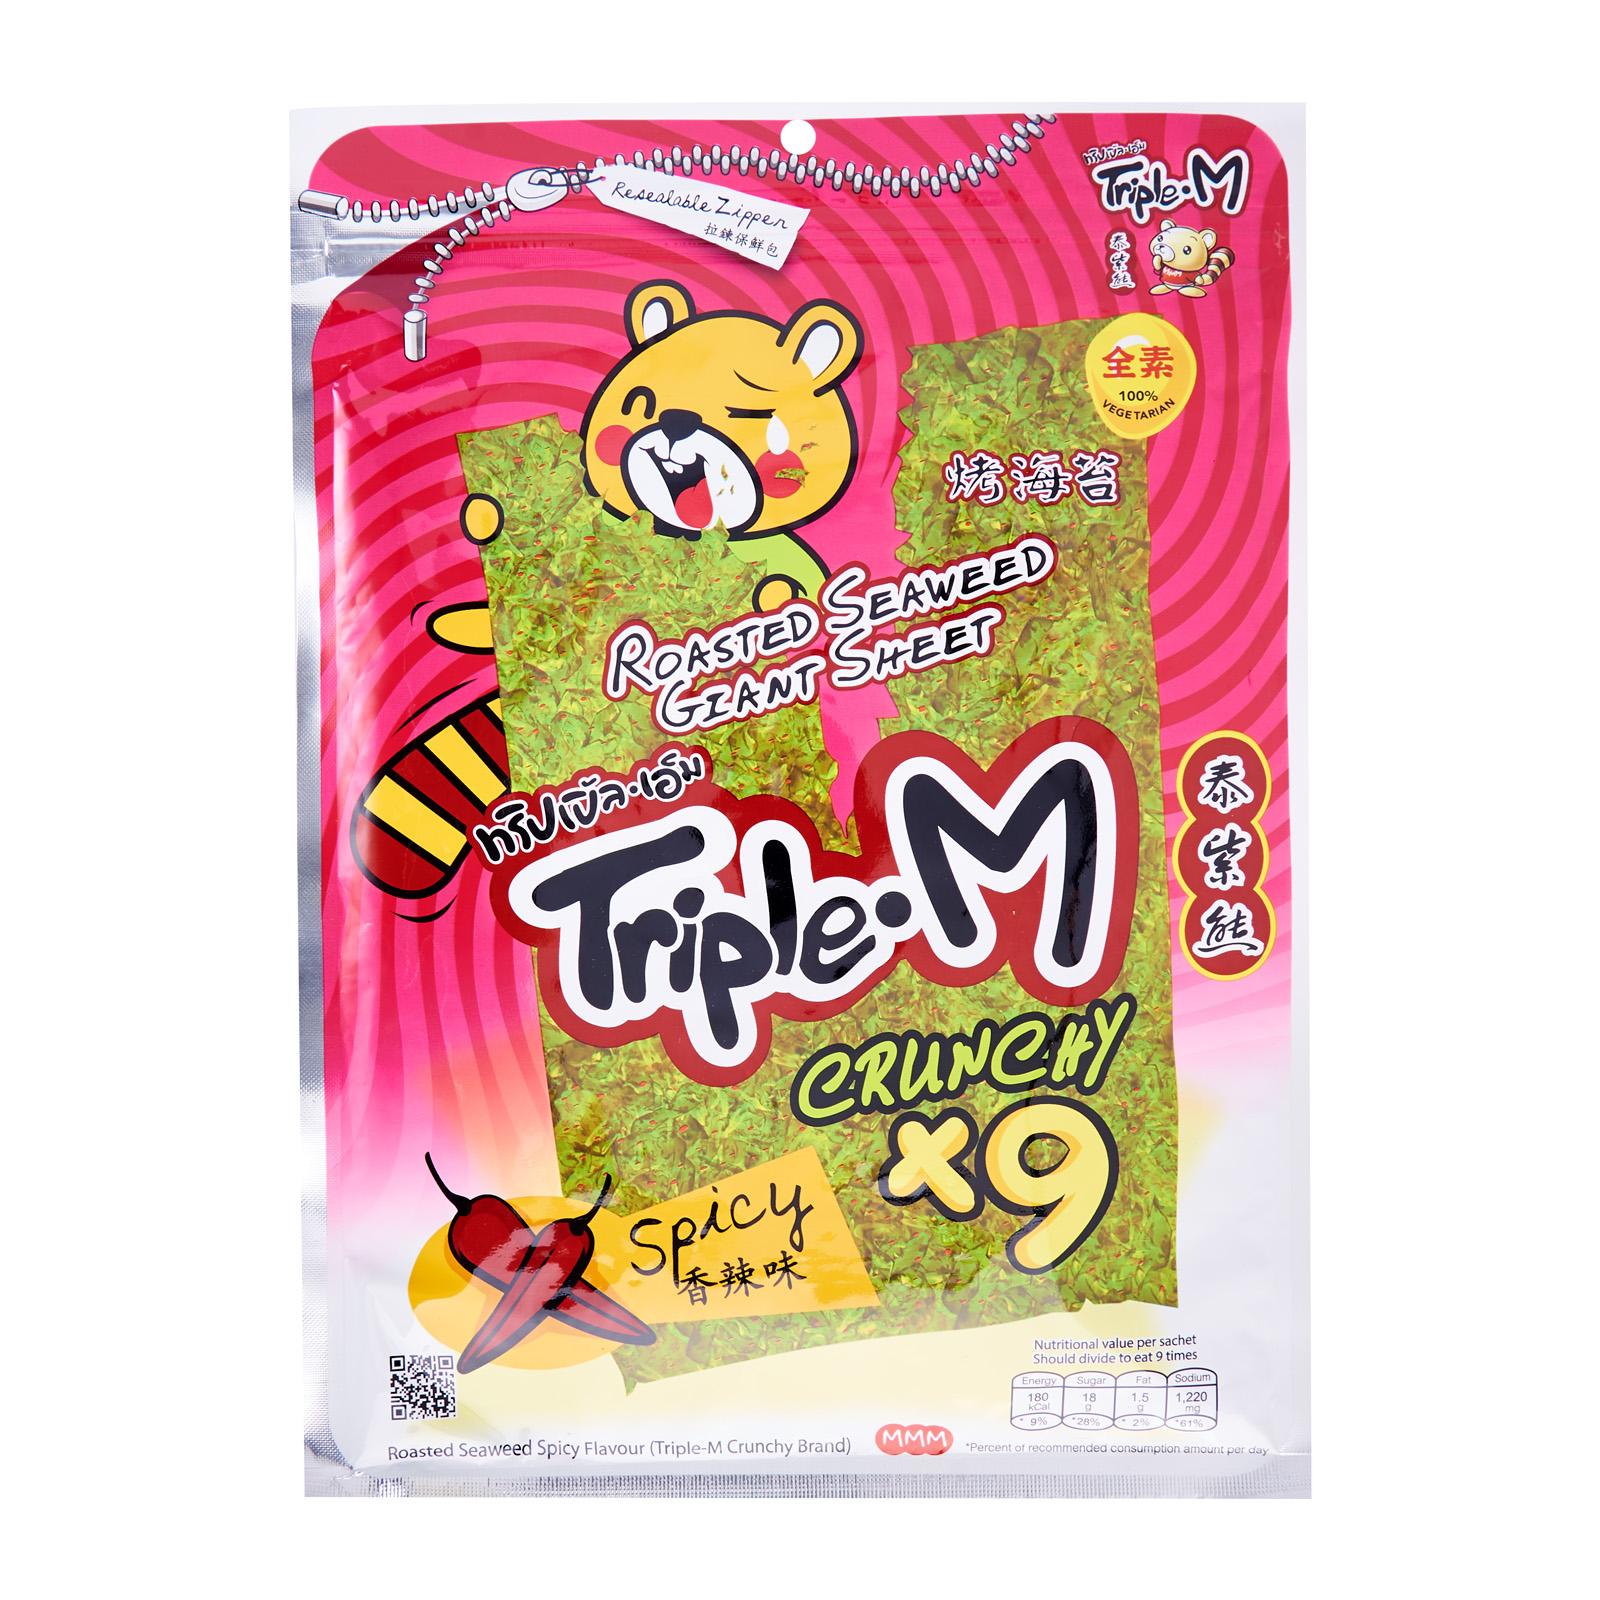 Triple M Roasted Seaweed (Spicy Flavour) 9s